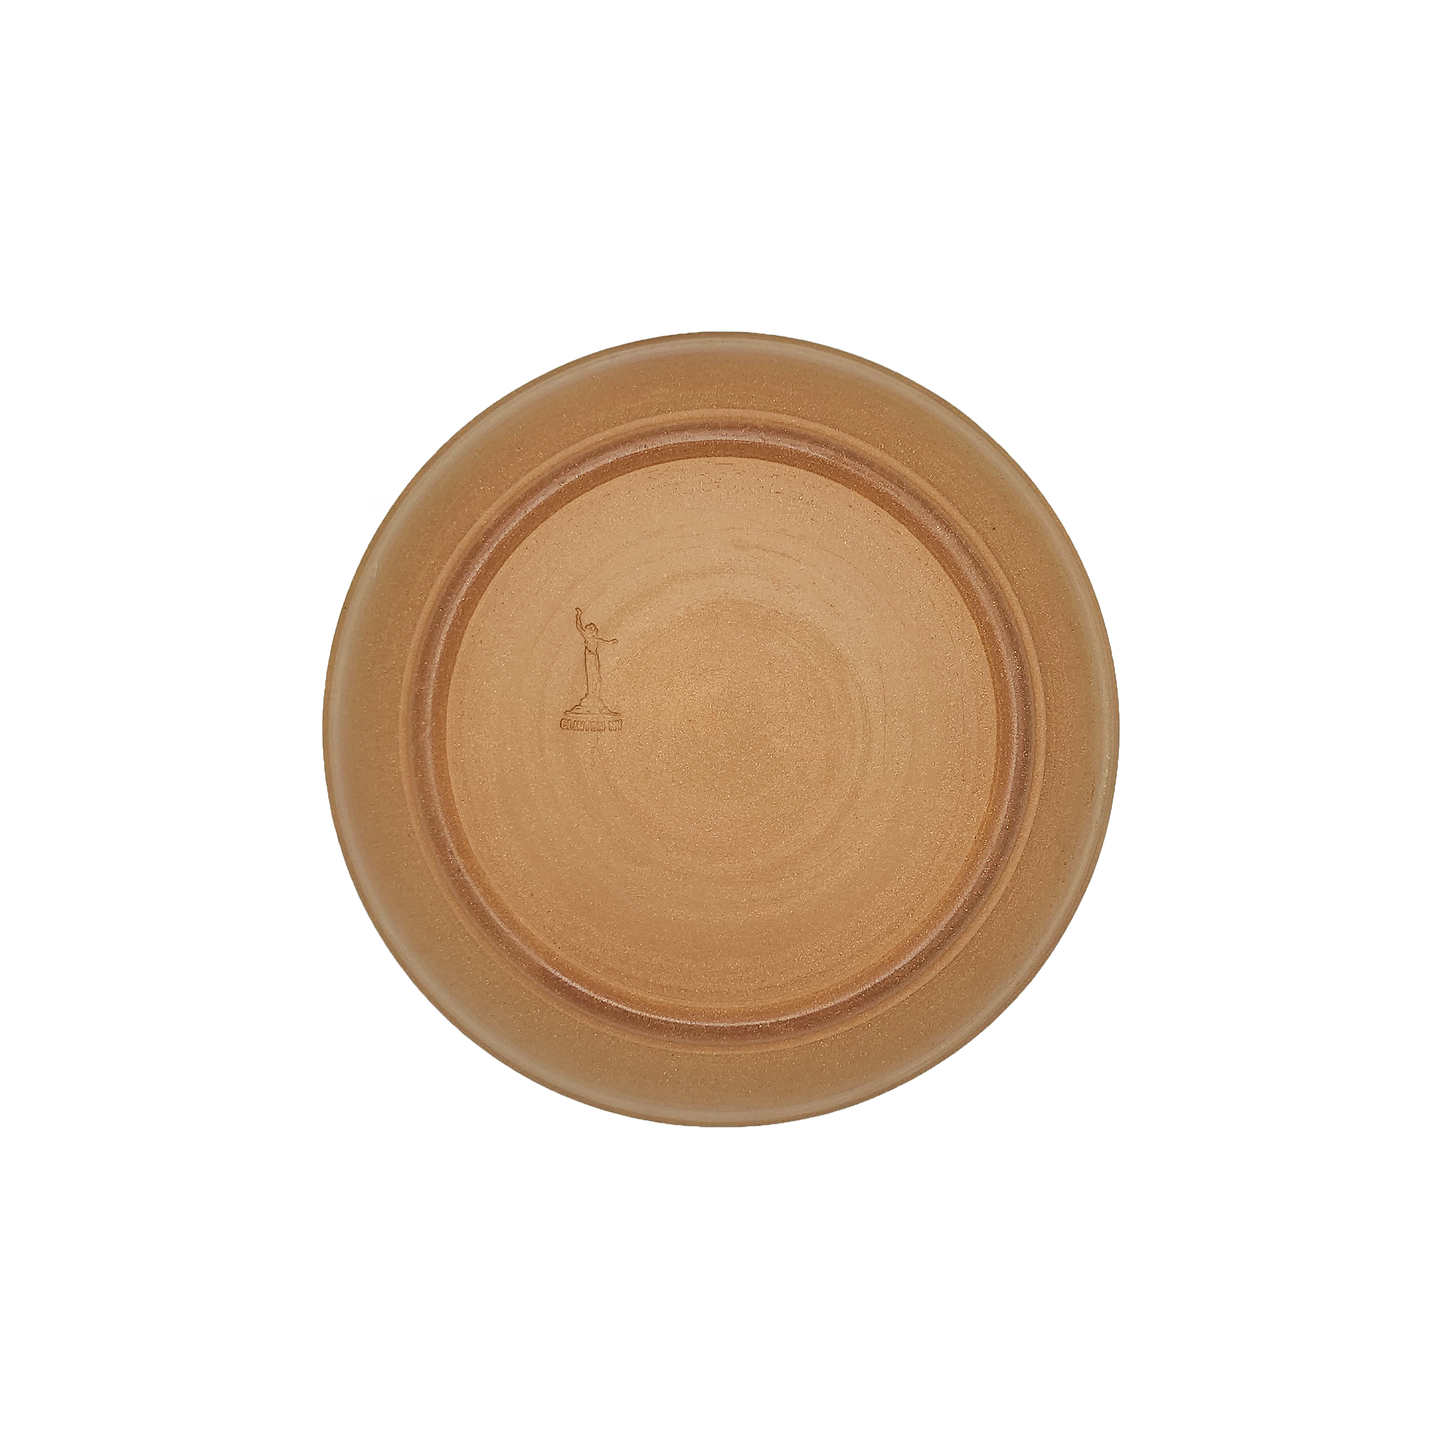 Image: A small pasta dish with a diameter of 8.5 inches, created by Clinton Pottery, featuring a natural glaze. The earthy tones of the natural glaze give the dish a rustic and organic appearance, perfect for serving your favorite pasta dishes with a touch of simplicity and elegance.